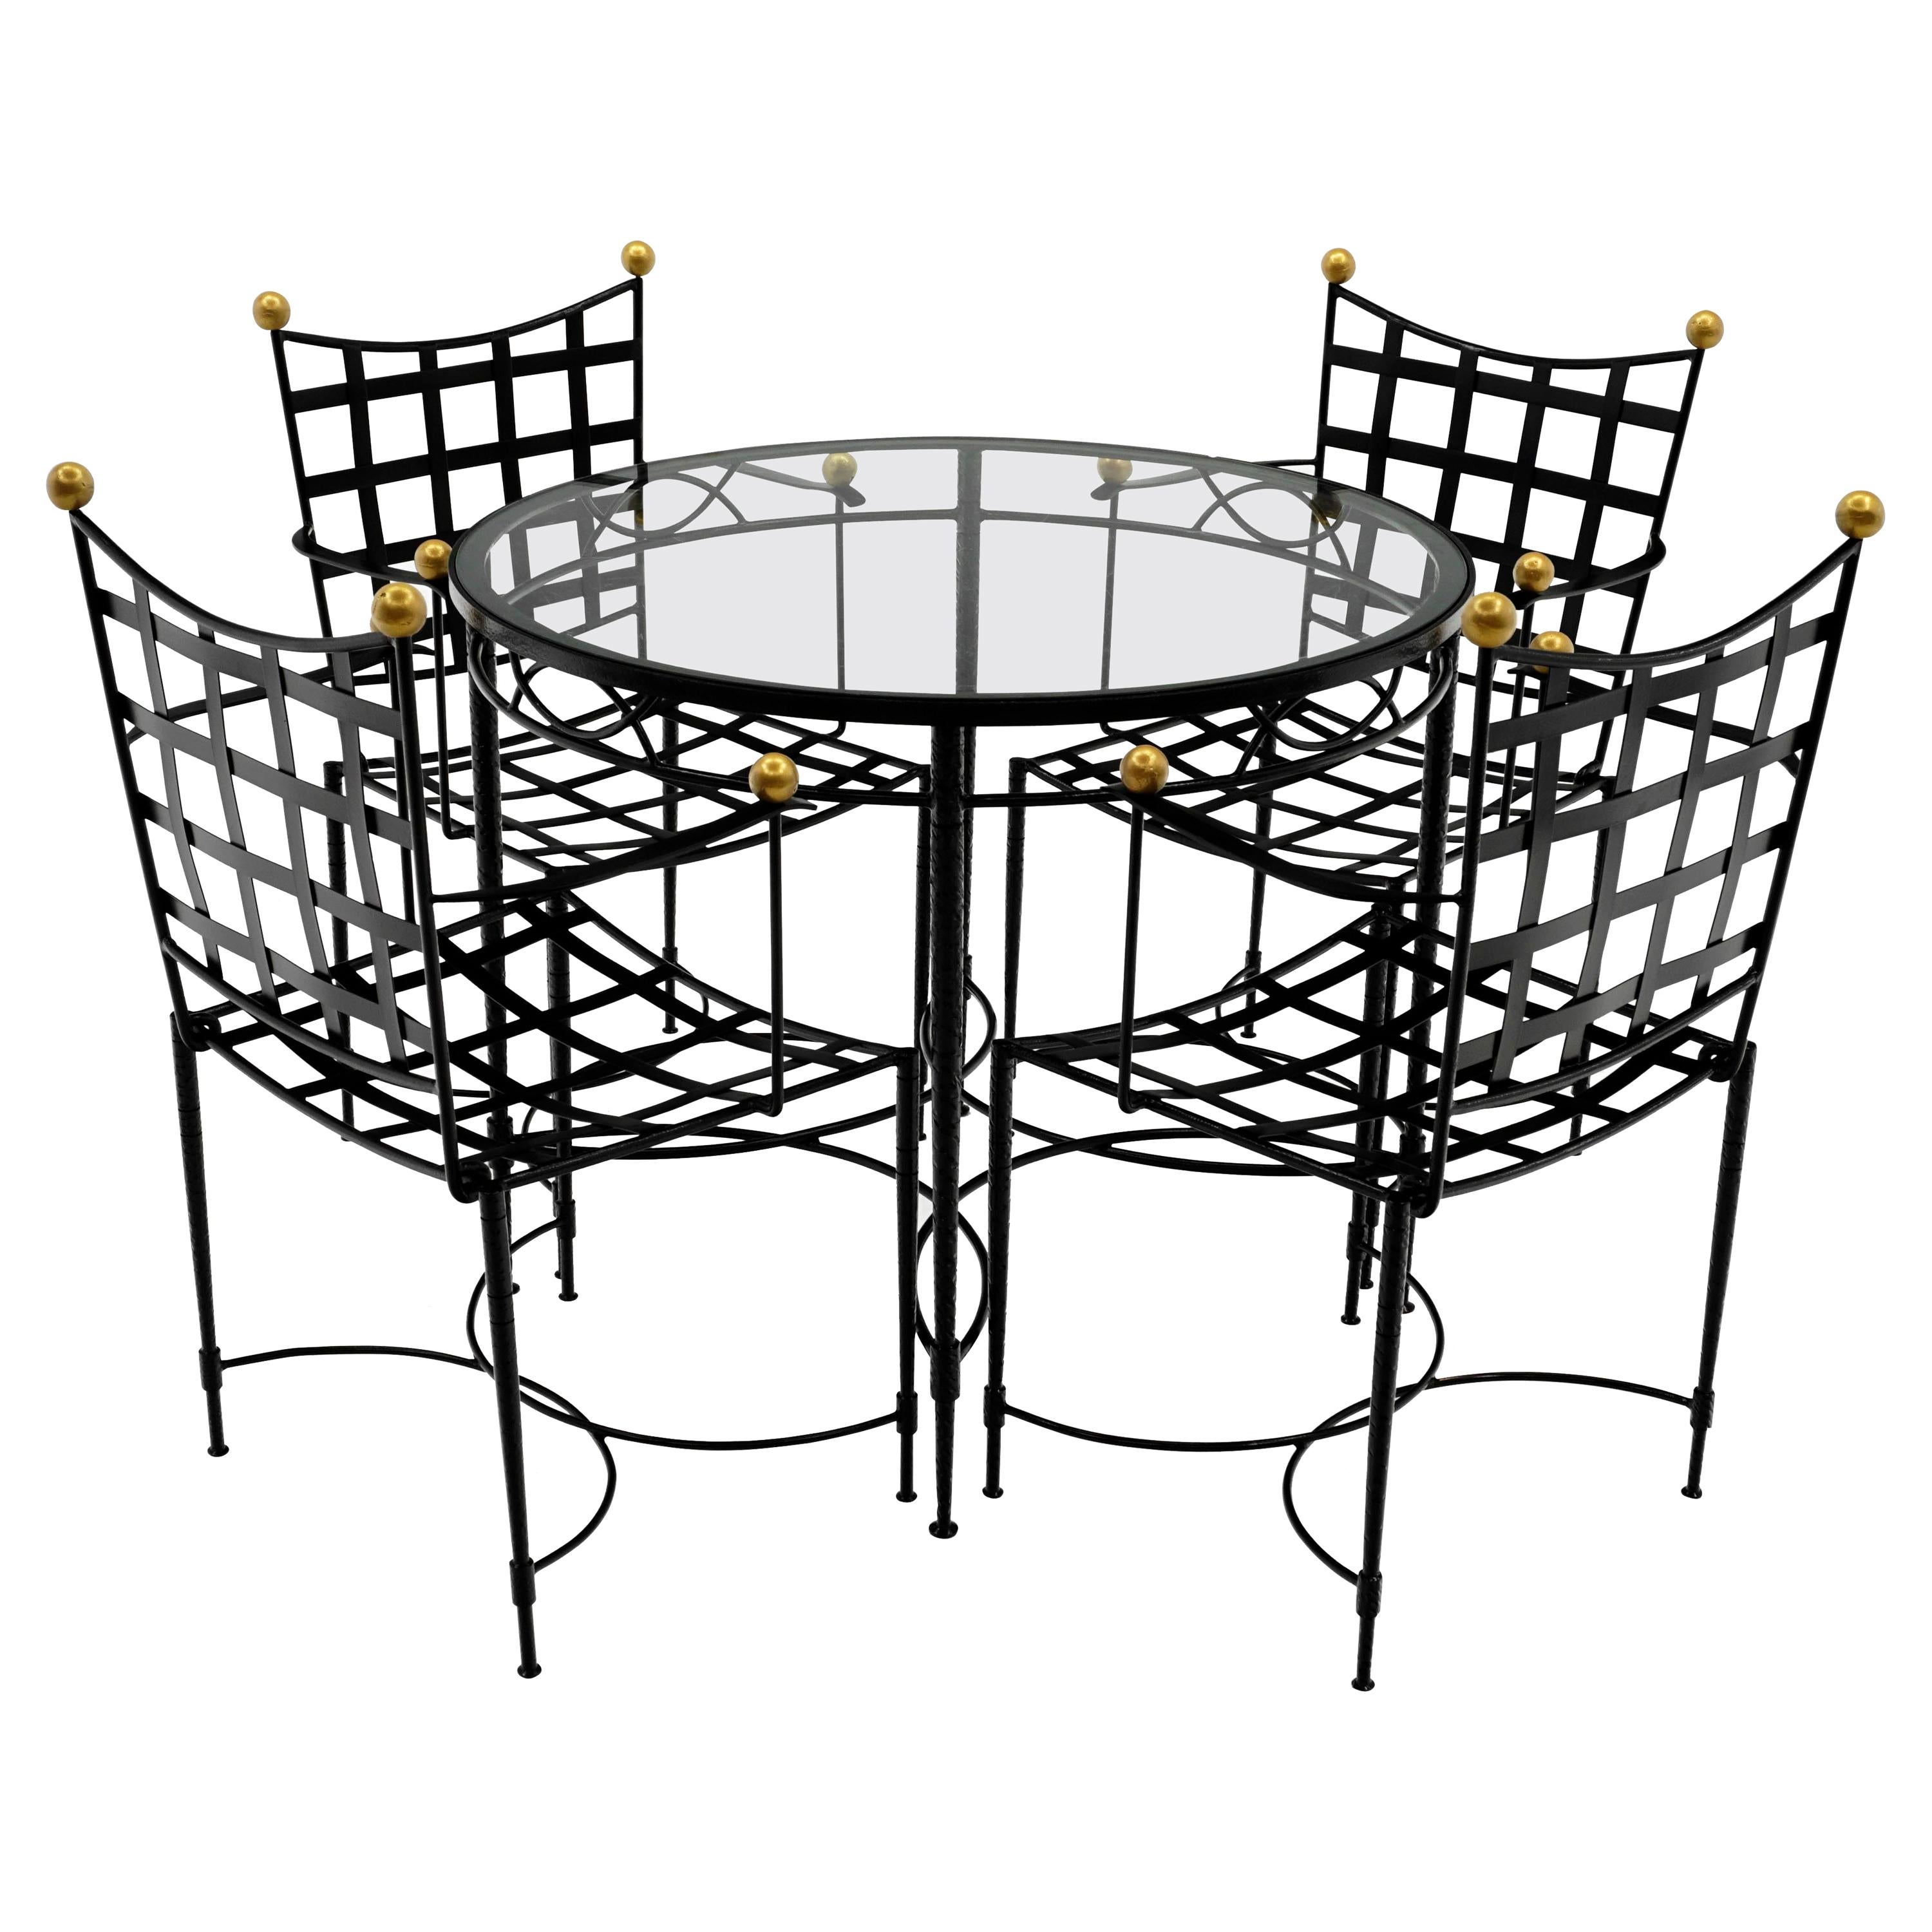 Outdoor Dining Table & Four Chairs by Mario Papperzini for John Salterini